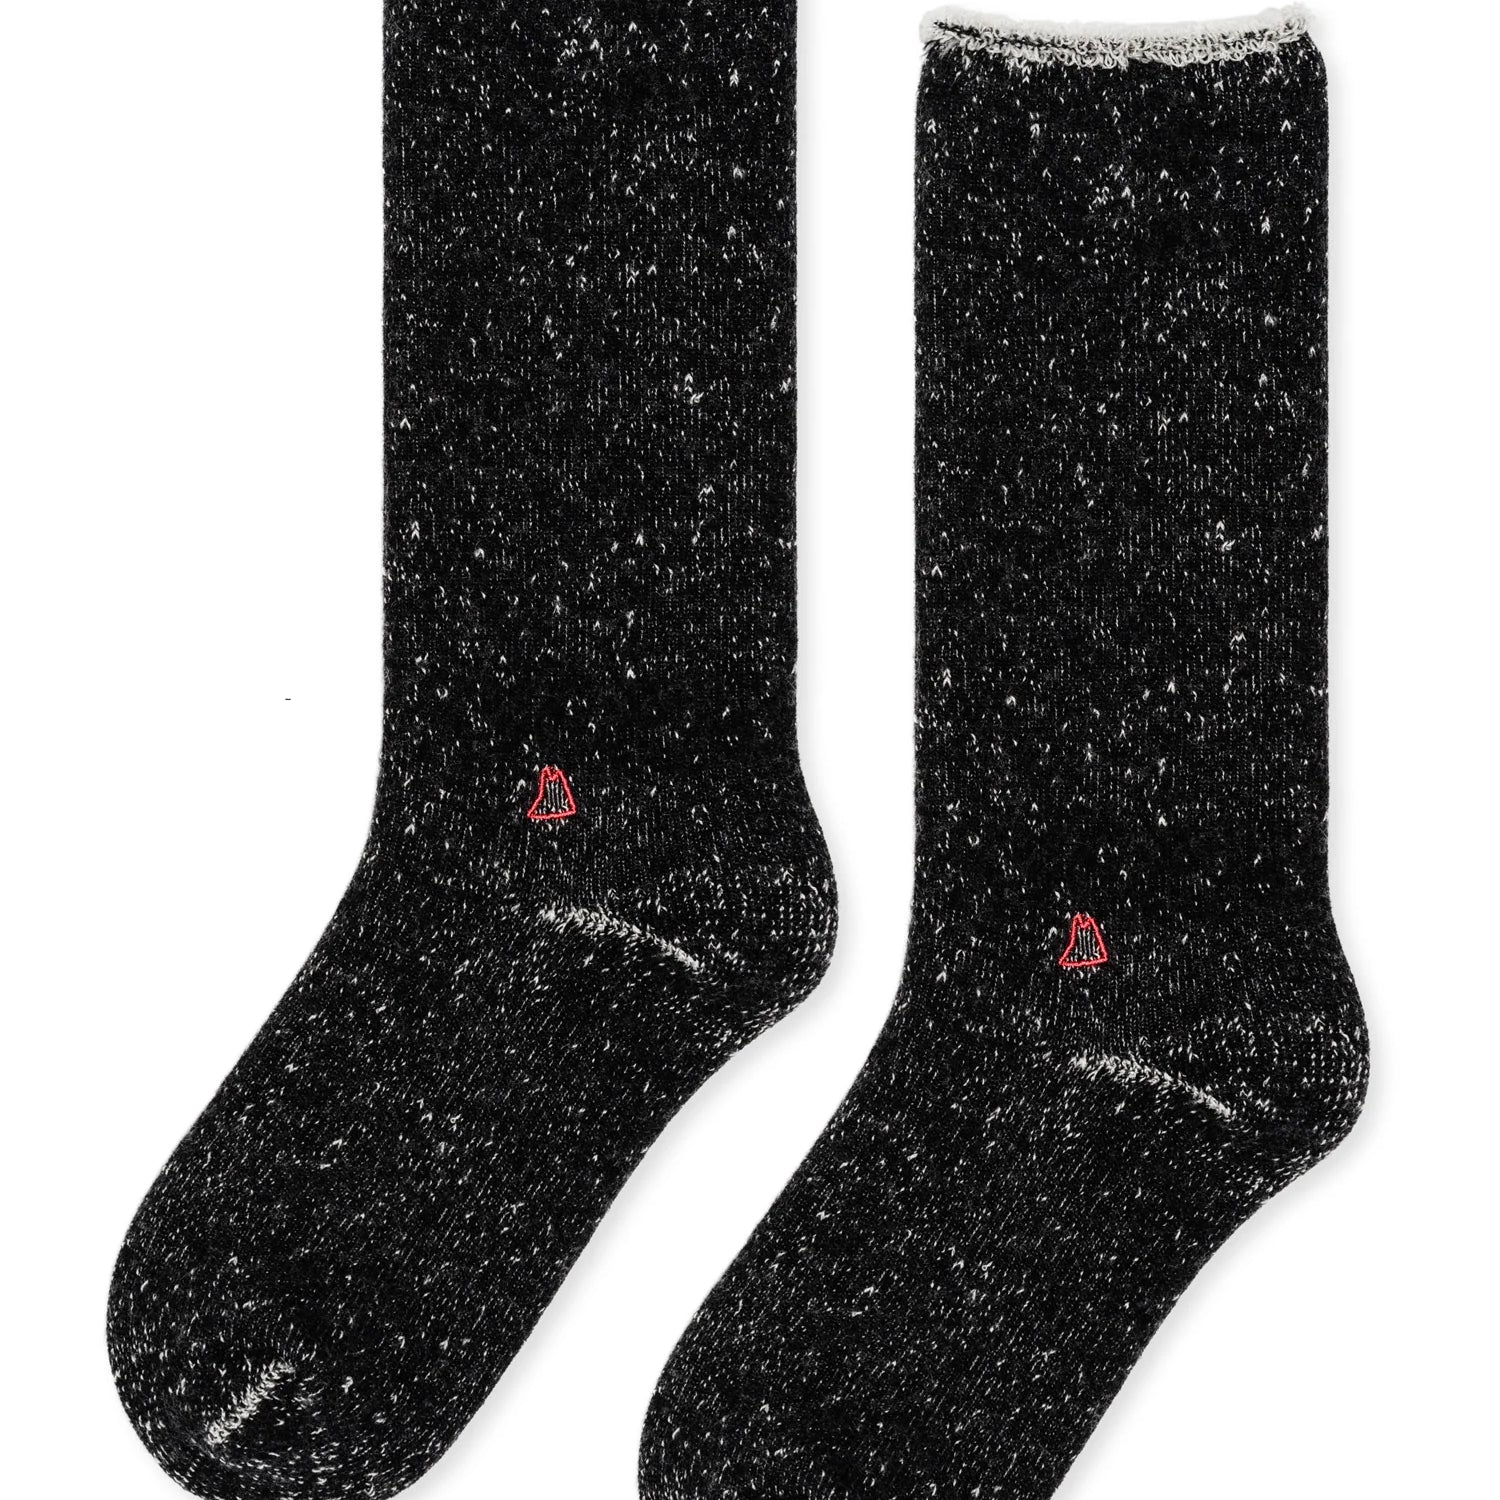 pair of black wool socks with small white flecks in the material. The pair of socks is laid flat on top of a white background. 